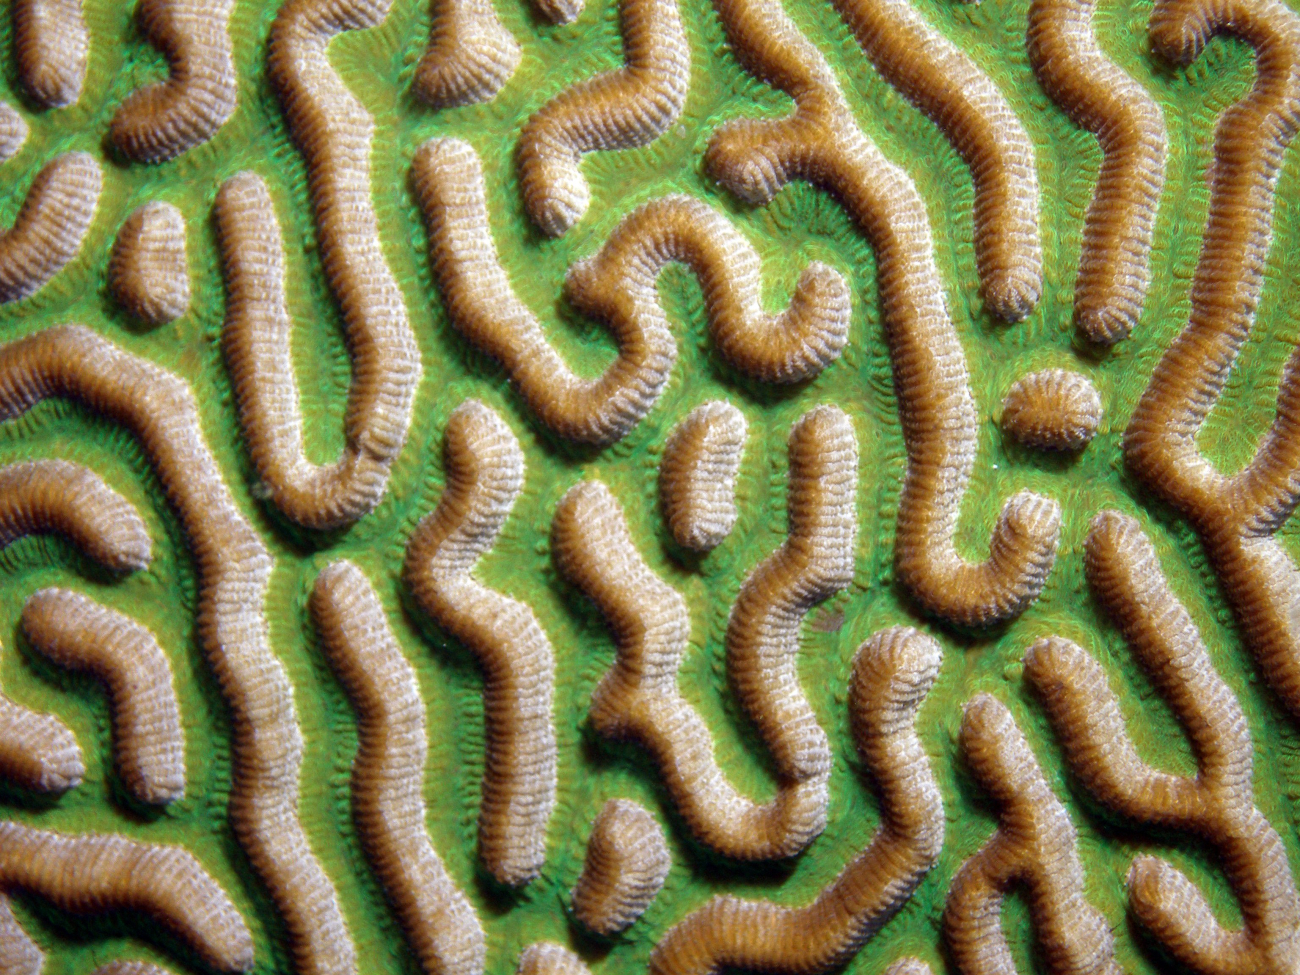 This close-up image of symmetrical brain coral (Diploria strigosa) shows thegrooved surface of the coral which os one of its most defining features